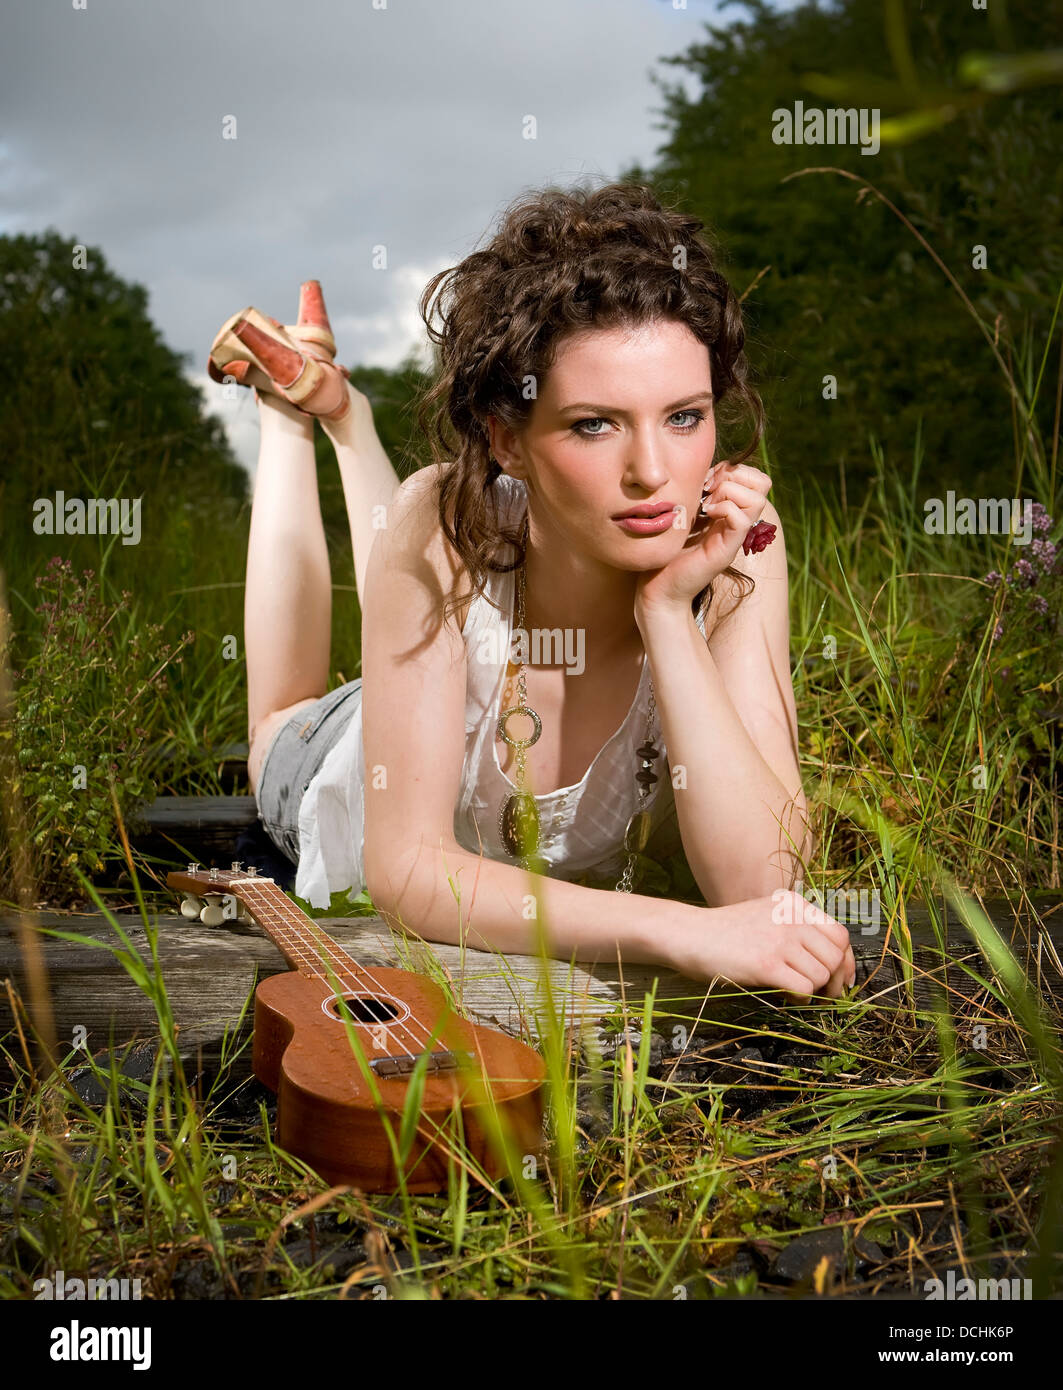 model with ukulele lying in grass looking into the camera on an old railway track wearing jewelery Stock Photo